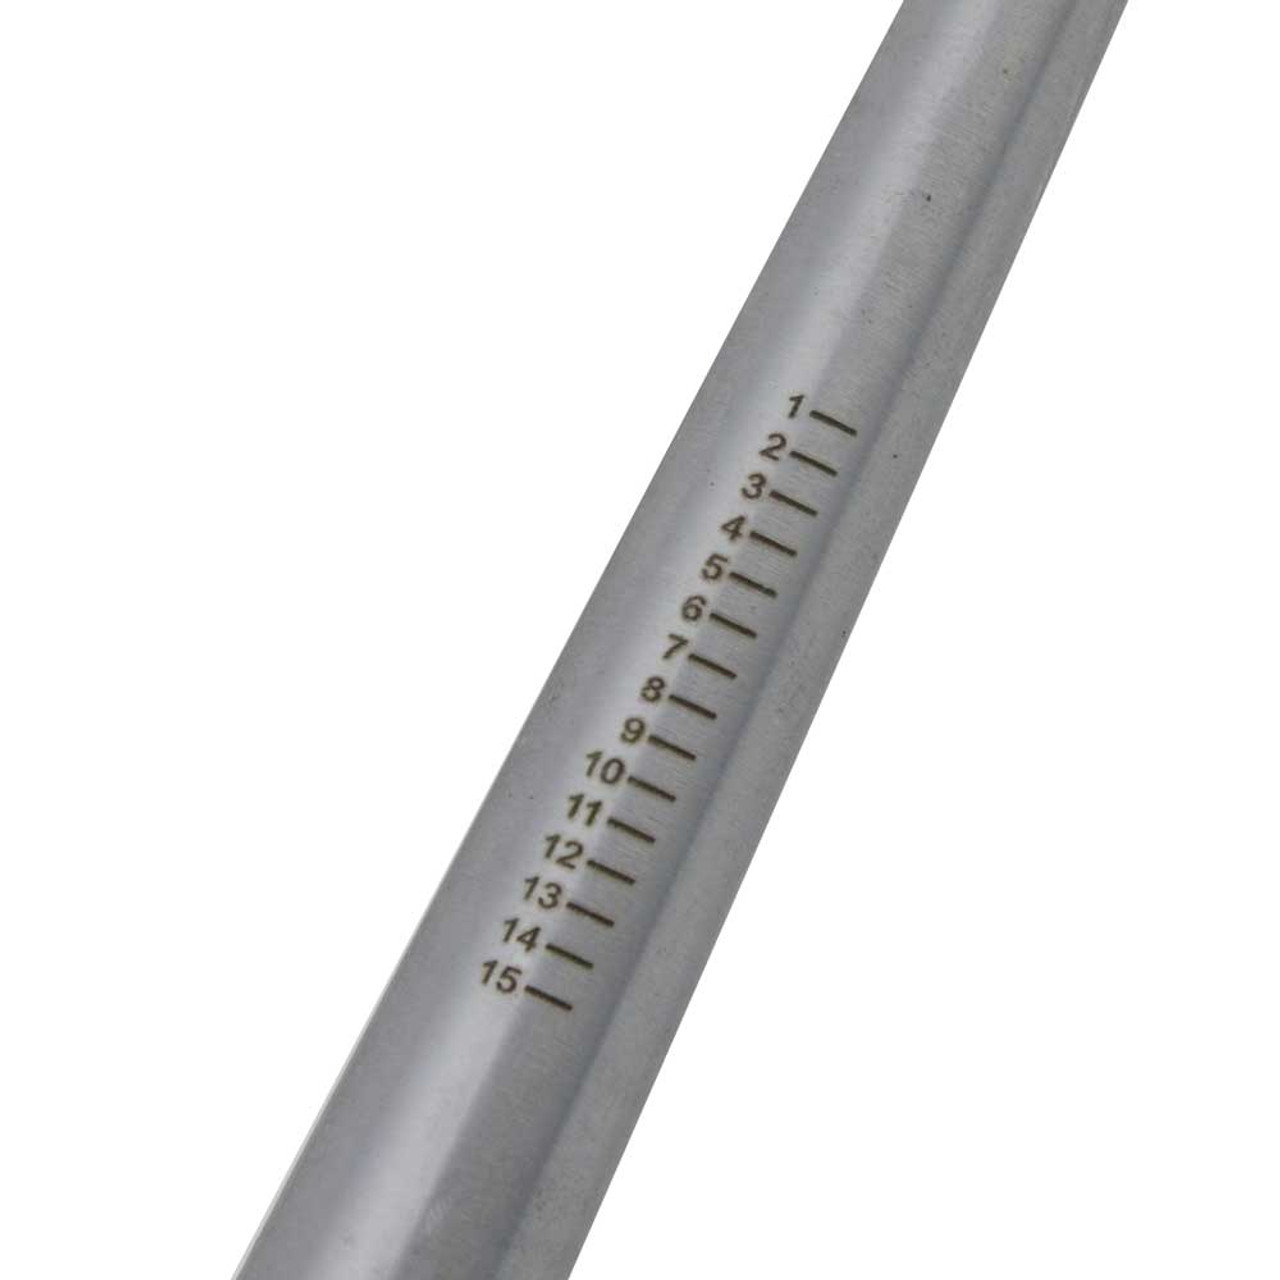 Steel Ring Mandrel Polished Chrome 11.5 Inch Sizes 1 to 15 for Jewelry  Making and Sizing